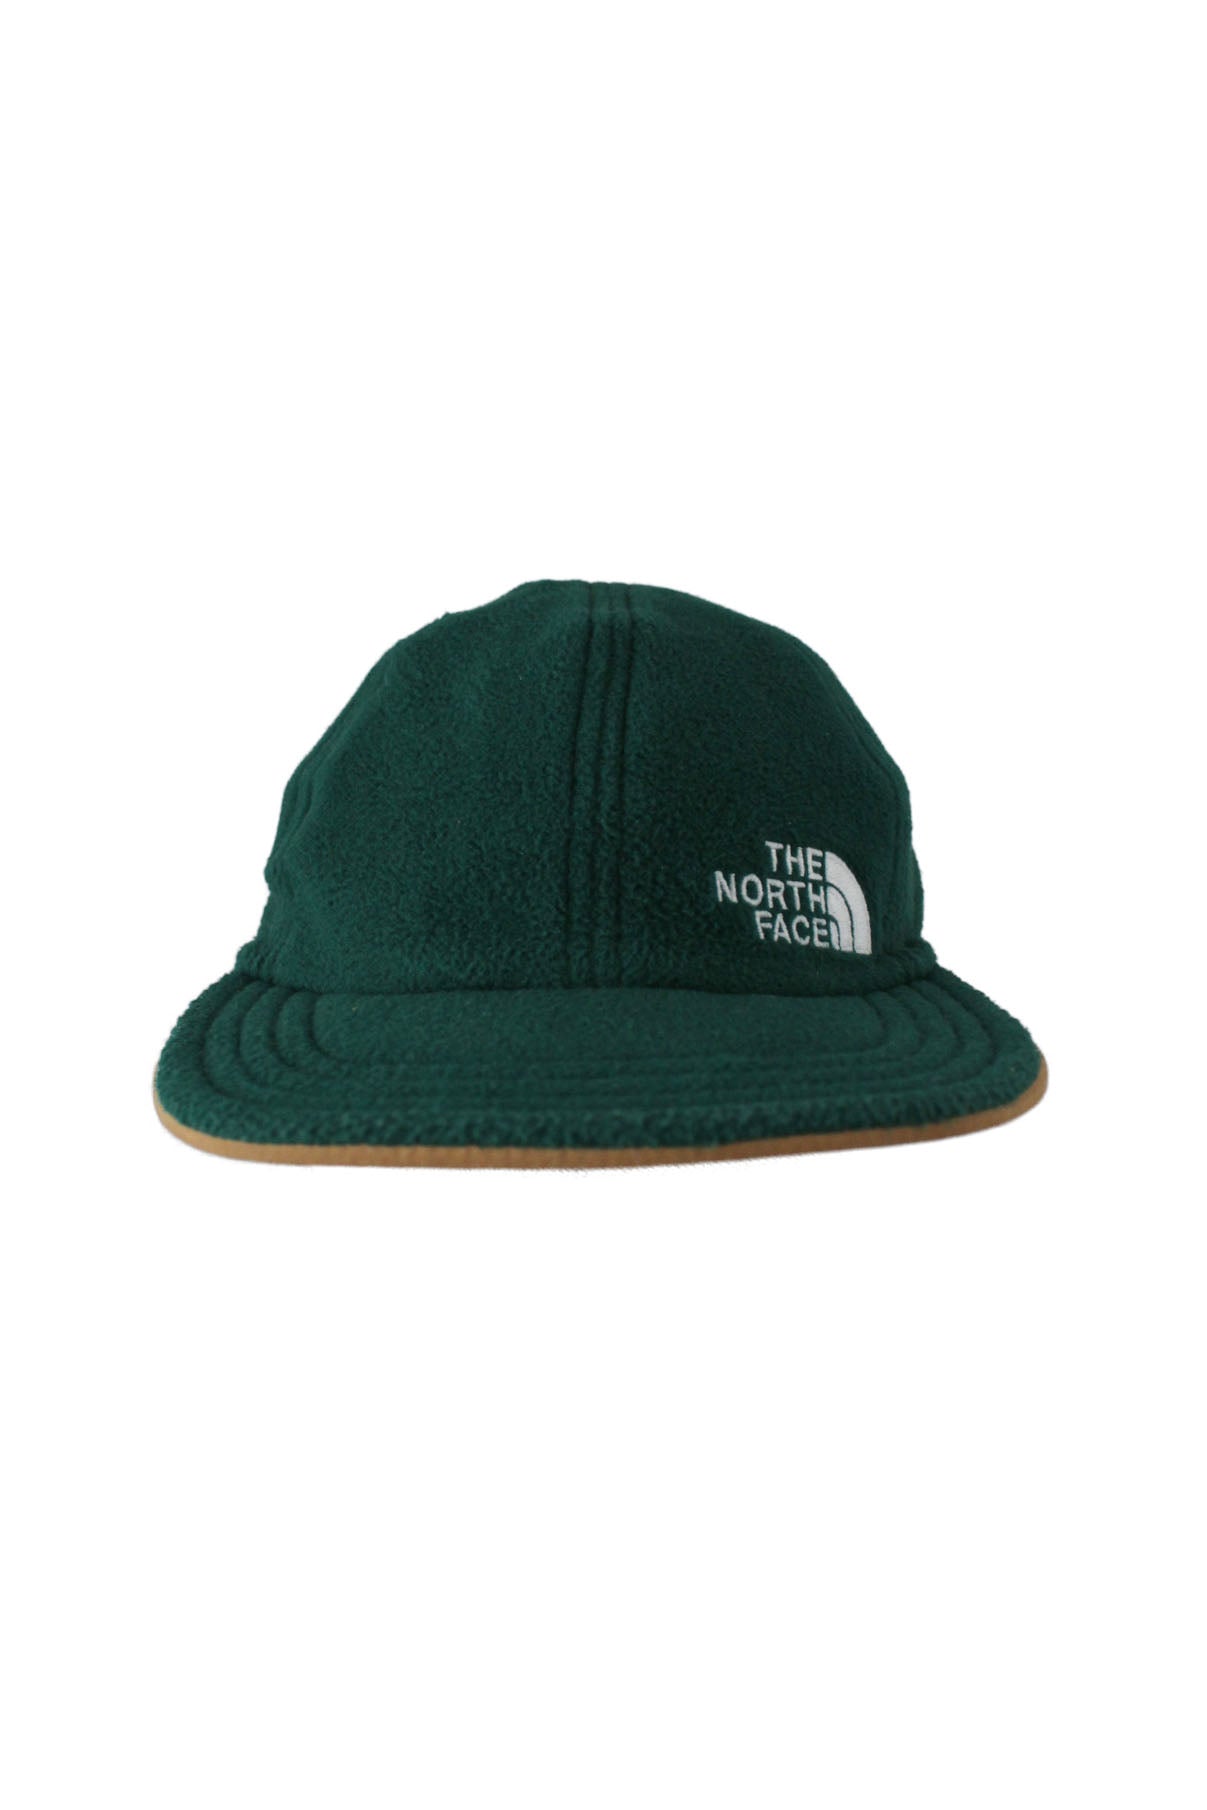 front view of forest side of  the north face forest/camel reversible fleece/nylon hat. features ‘the north face’ logo at front left of both sides with adjustable drawstring closure at back.